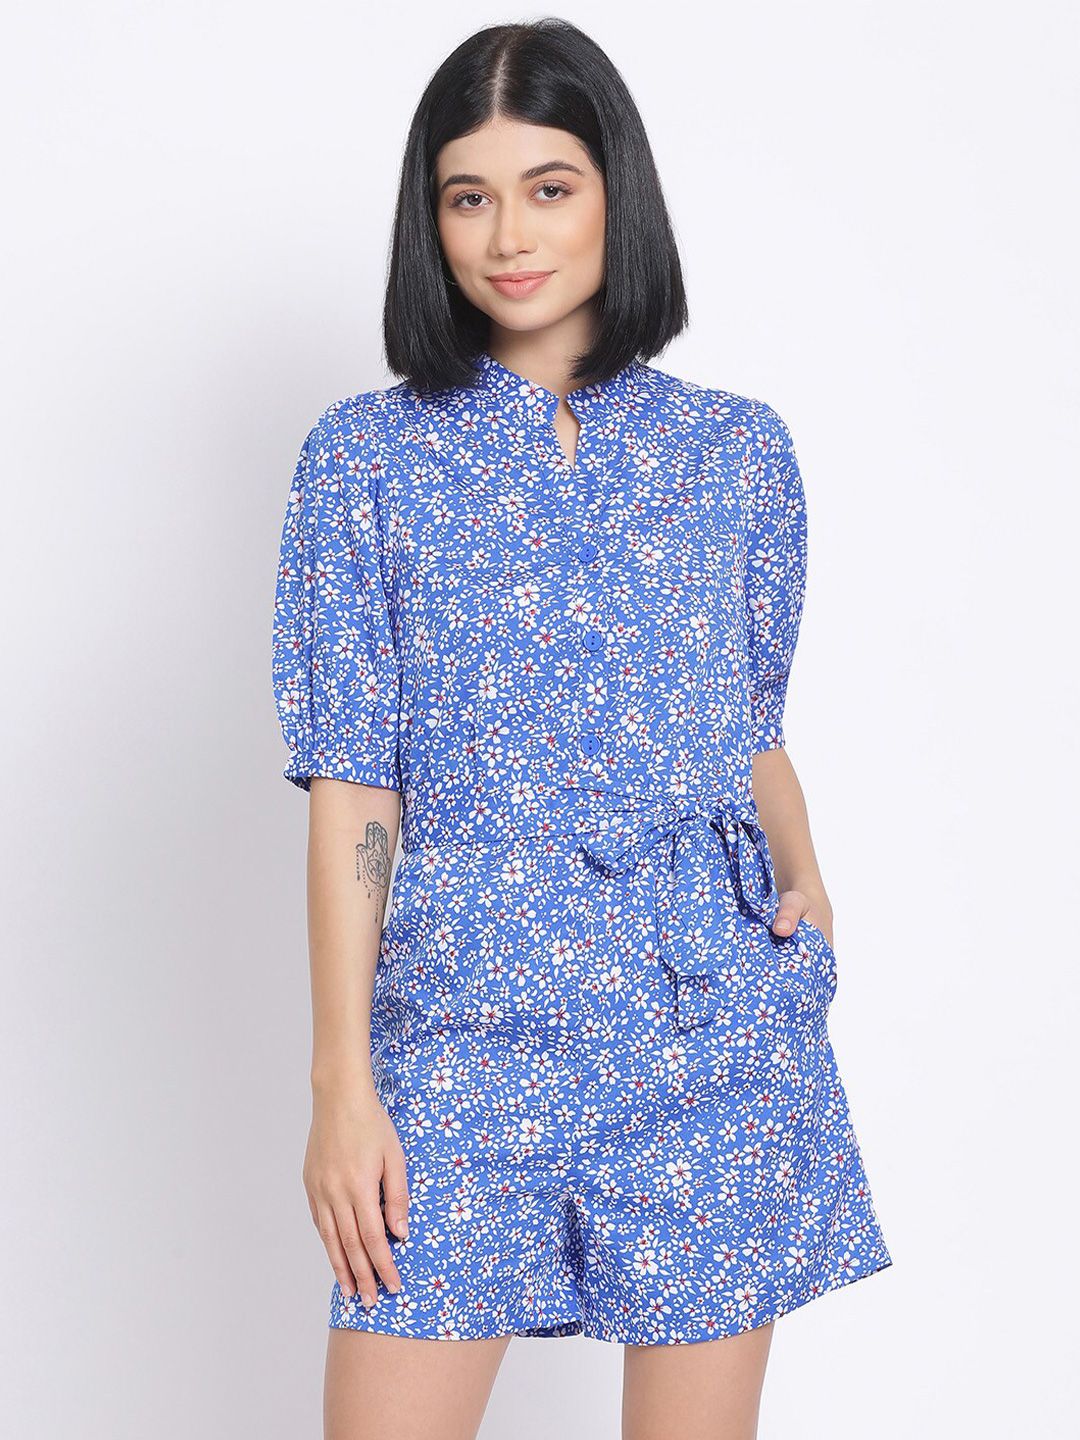 Oxolloxo Women Blue & White Printed Playsuit Price in India